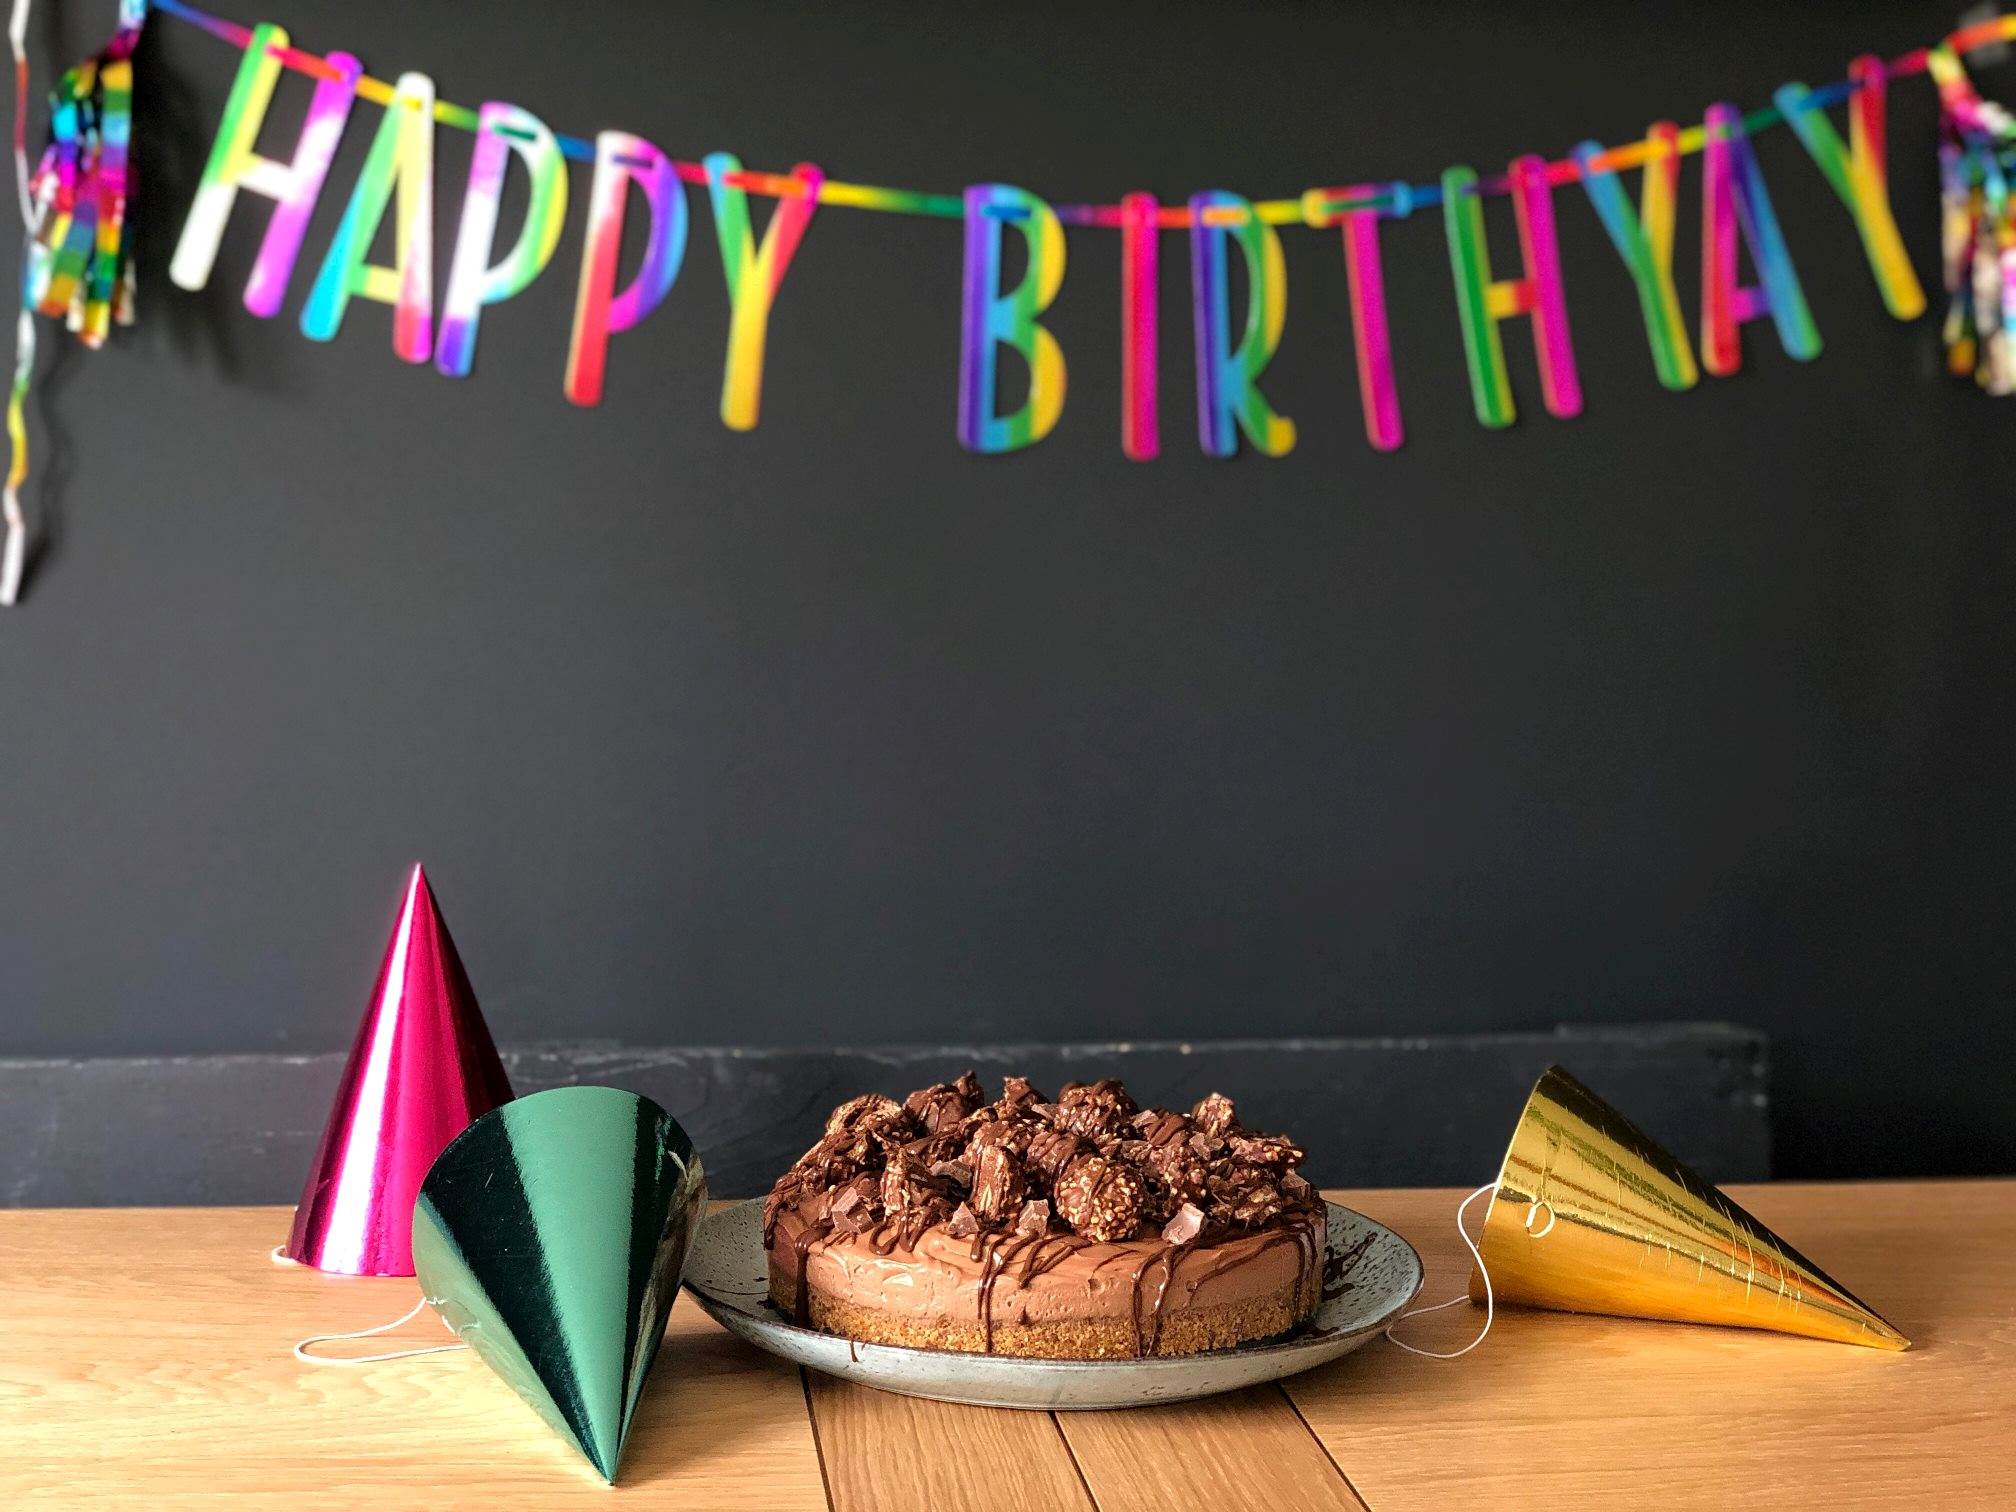 Chocolate birthday cake with a colourful happy birthday banner above